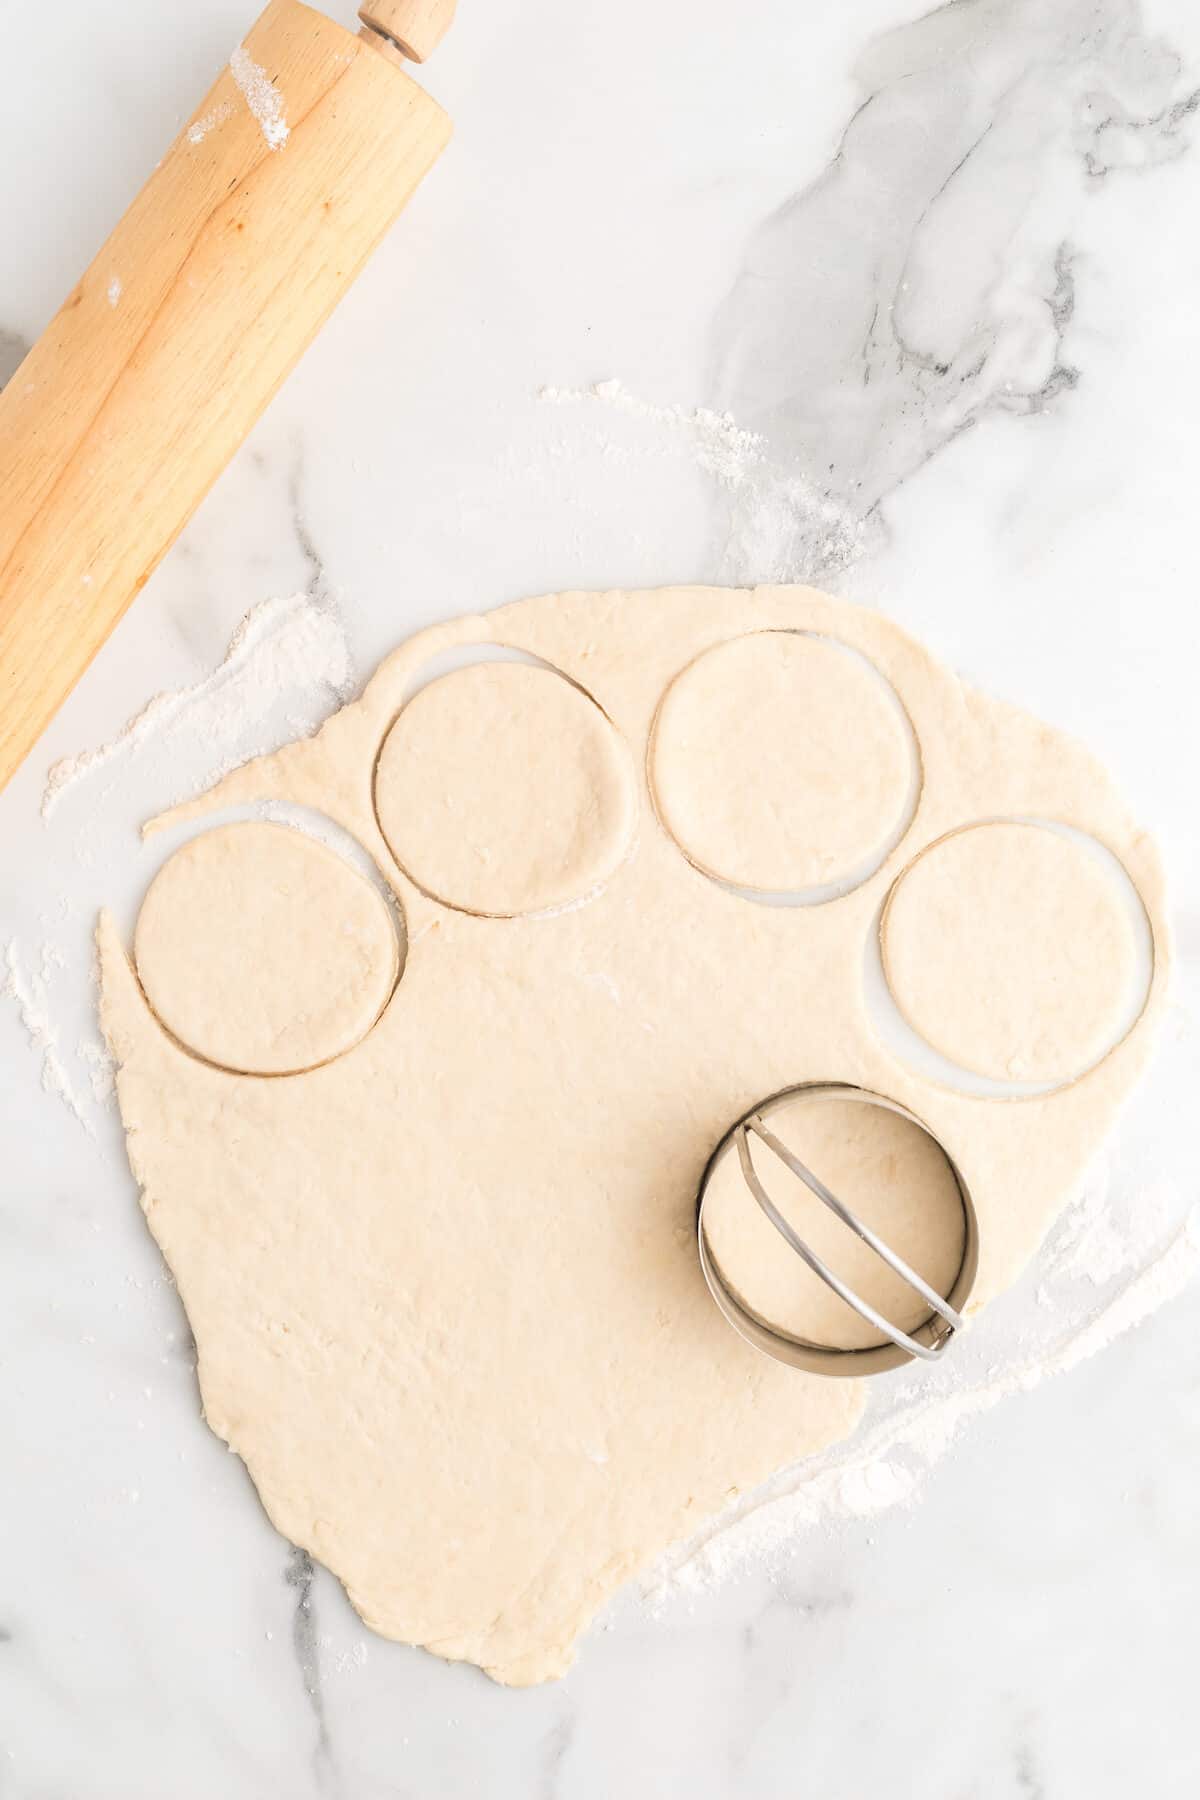 cutting out the scones with a biscuit cutter